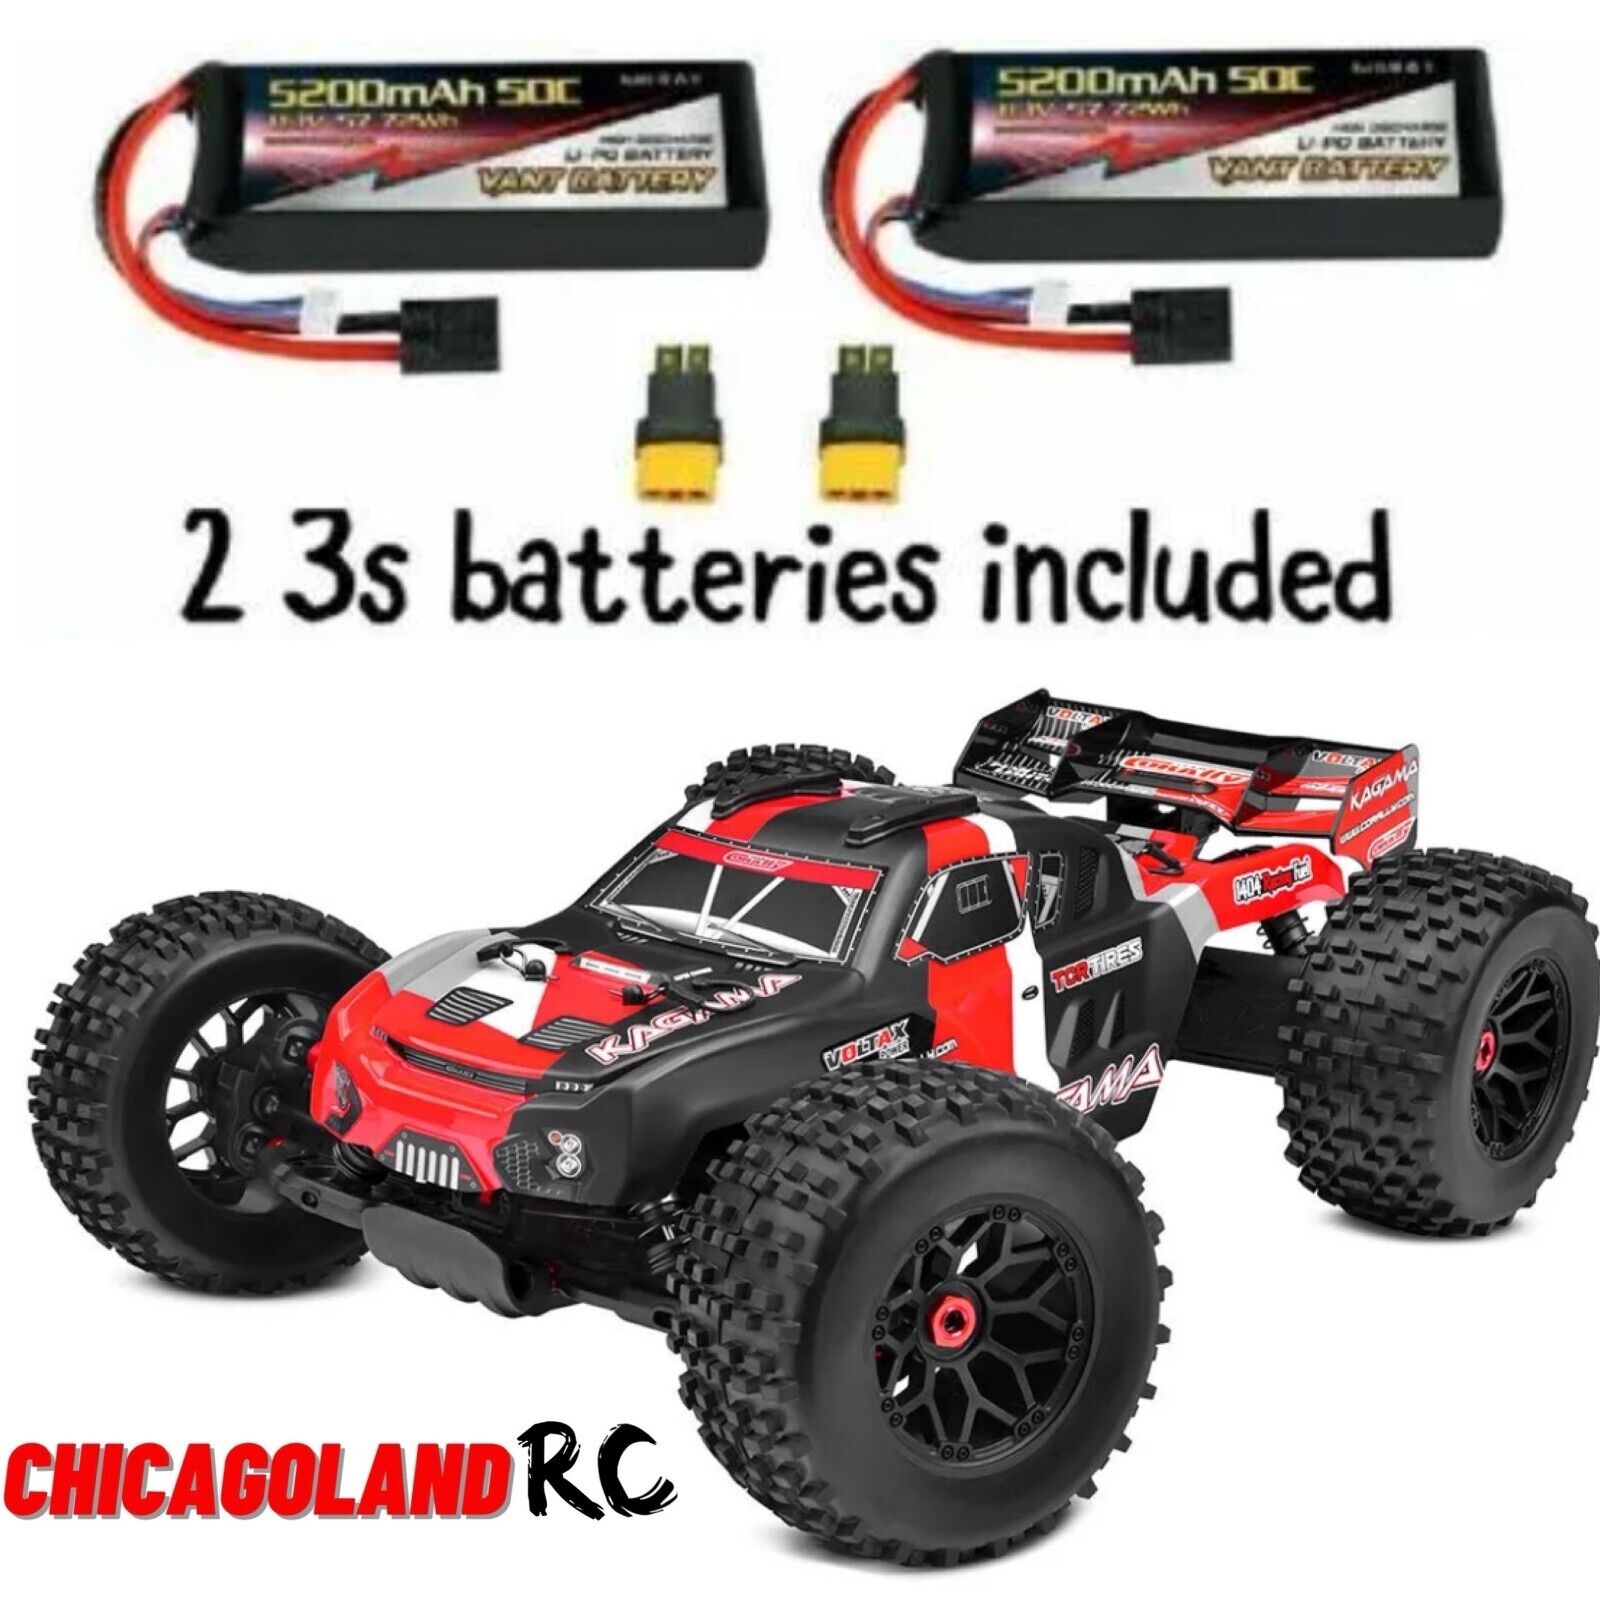 Team Corally Kagama XP 6S Monster Truck RTR WITH 2 3S 5200MAH 50C LIPO BATTERIES